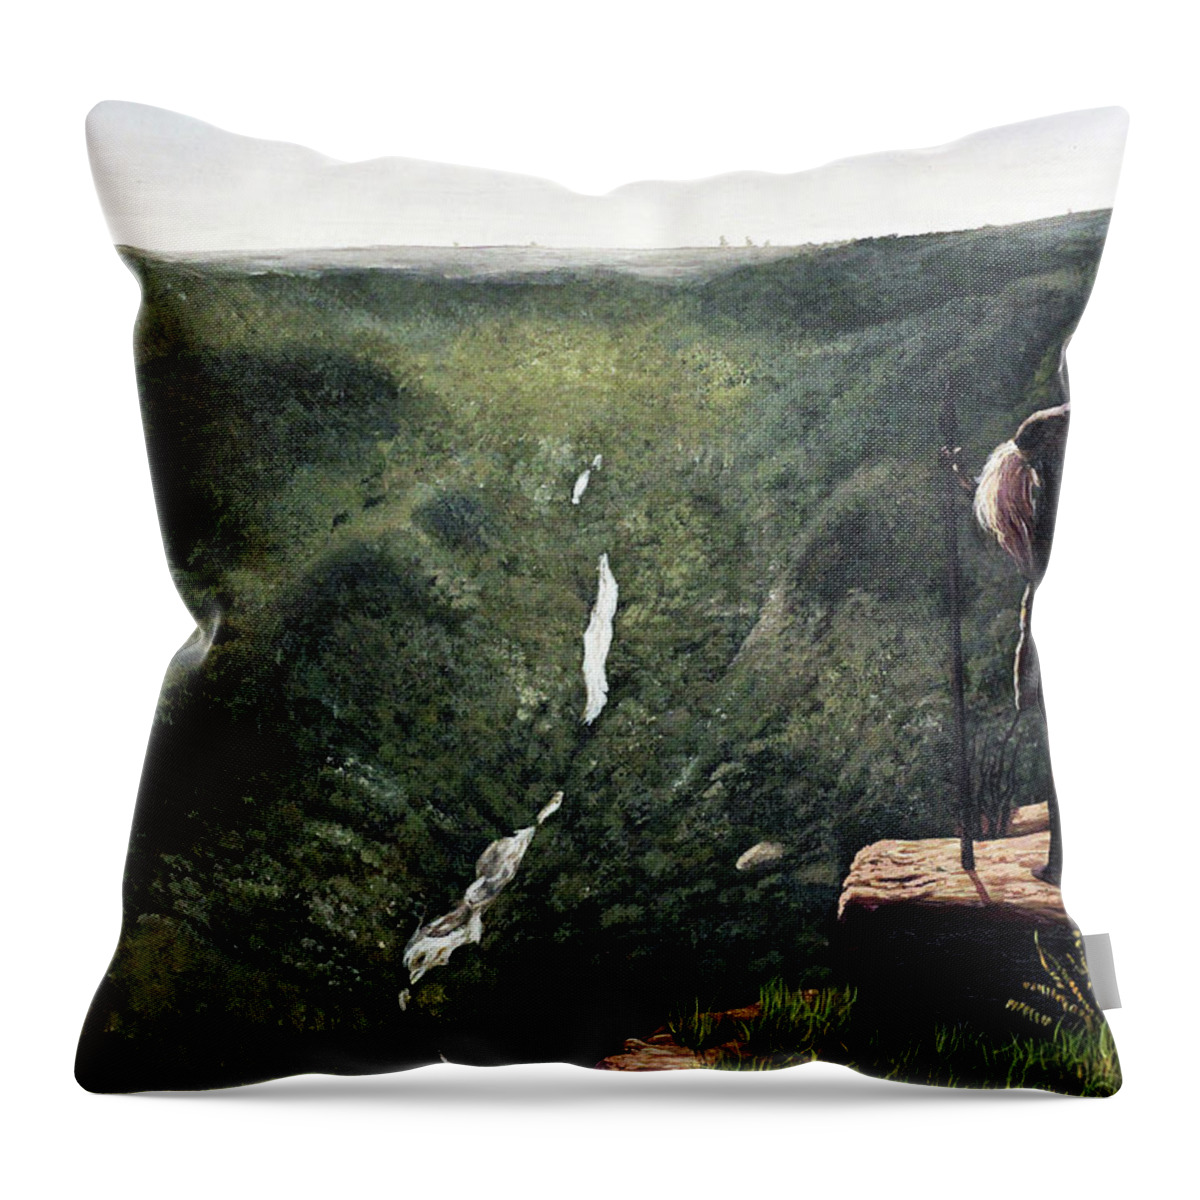 African Art Throw Pillow featuring the painting My Kingdom by Ronnie Moyo